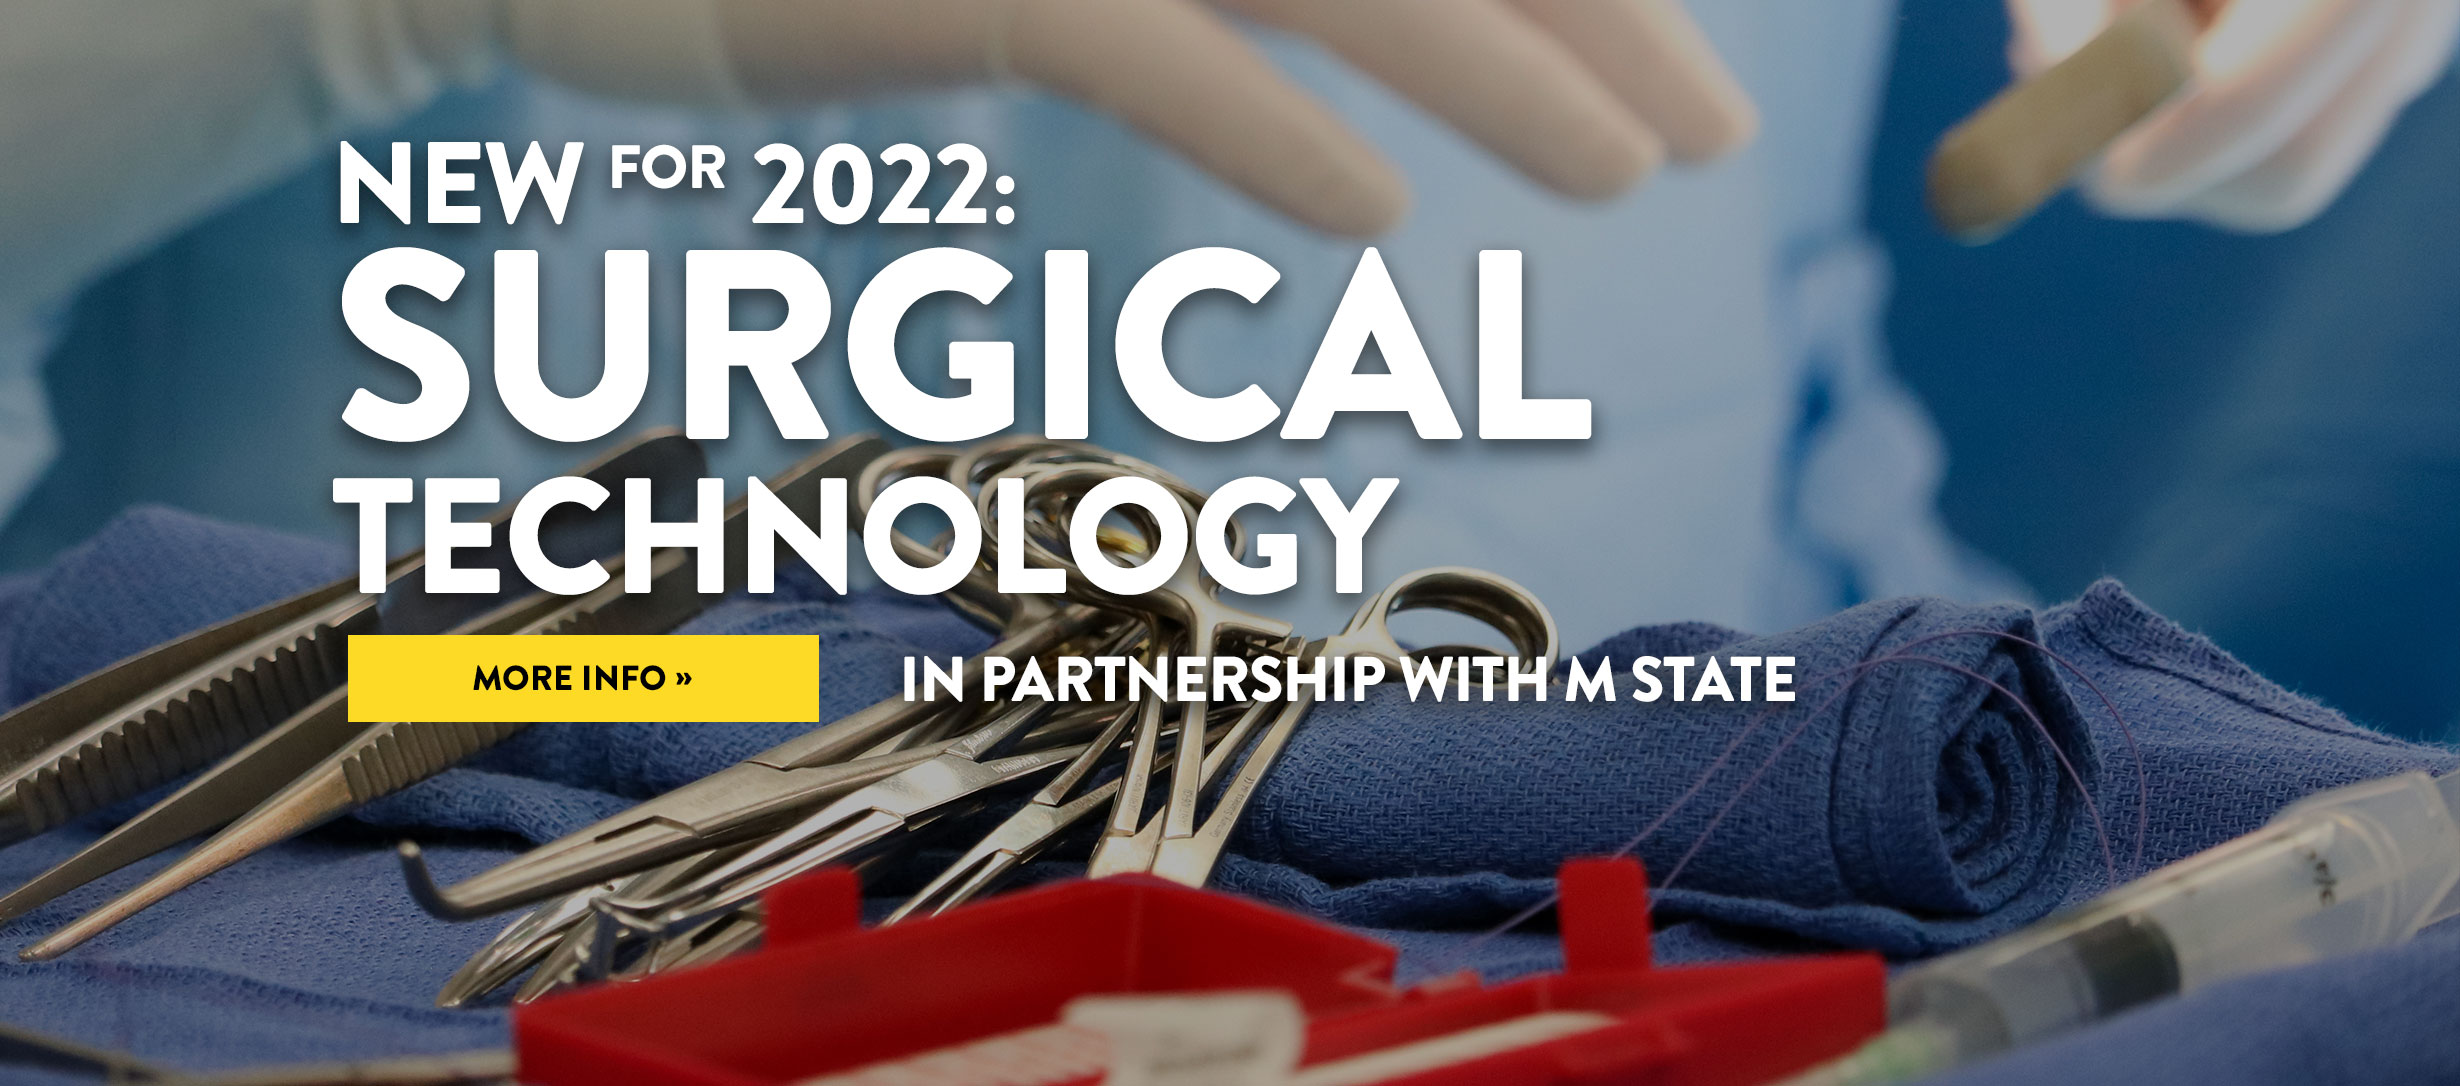 New for 2022! Surgical Technology